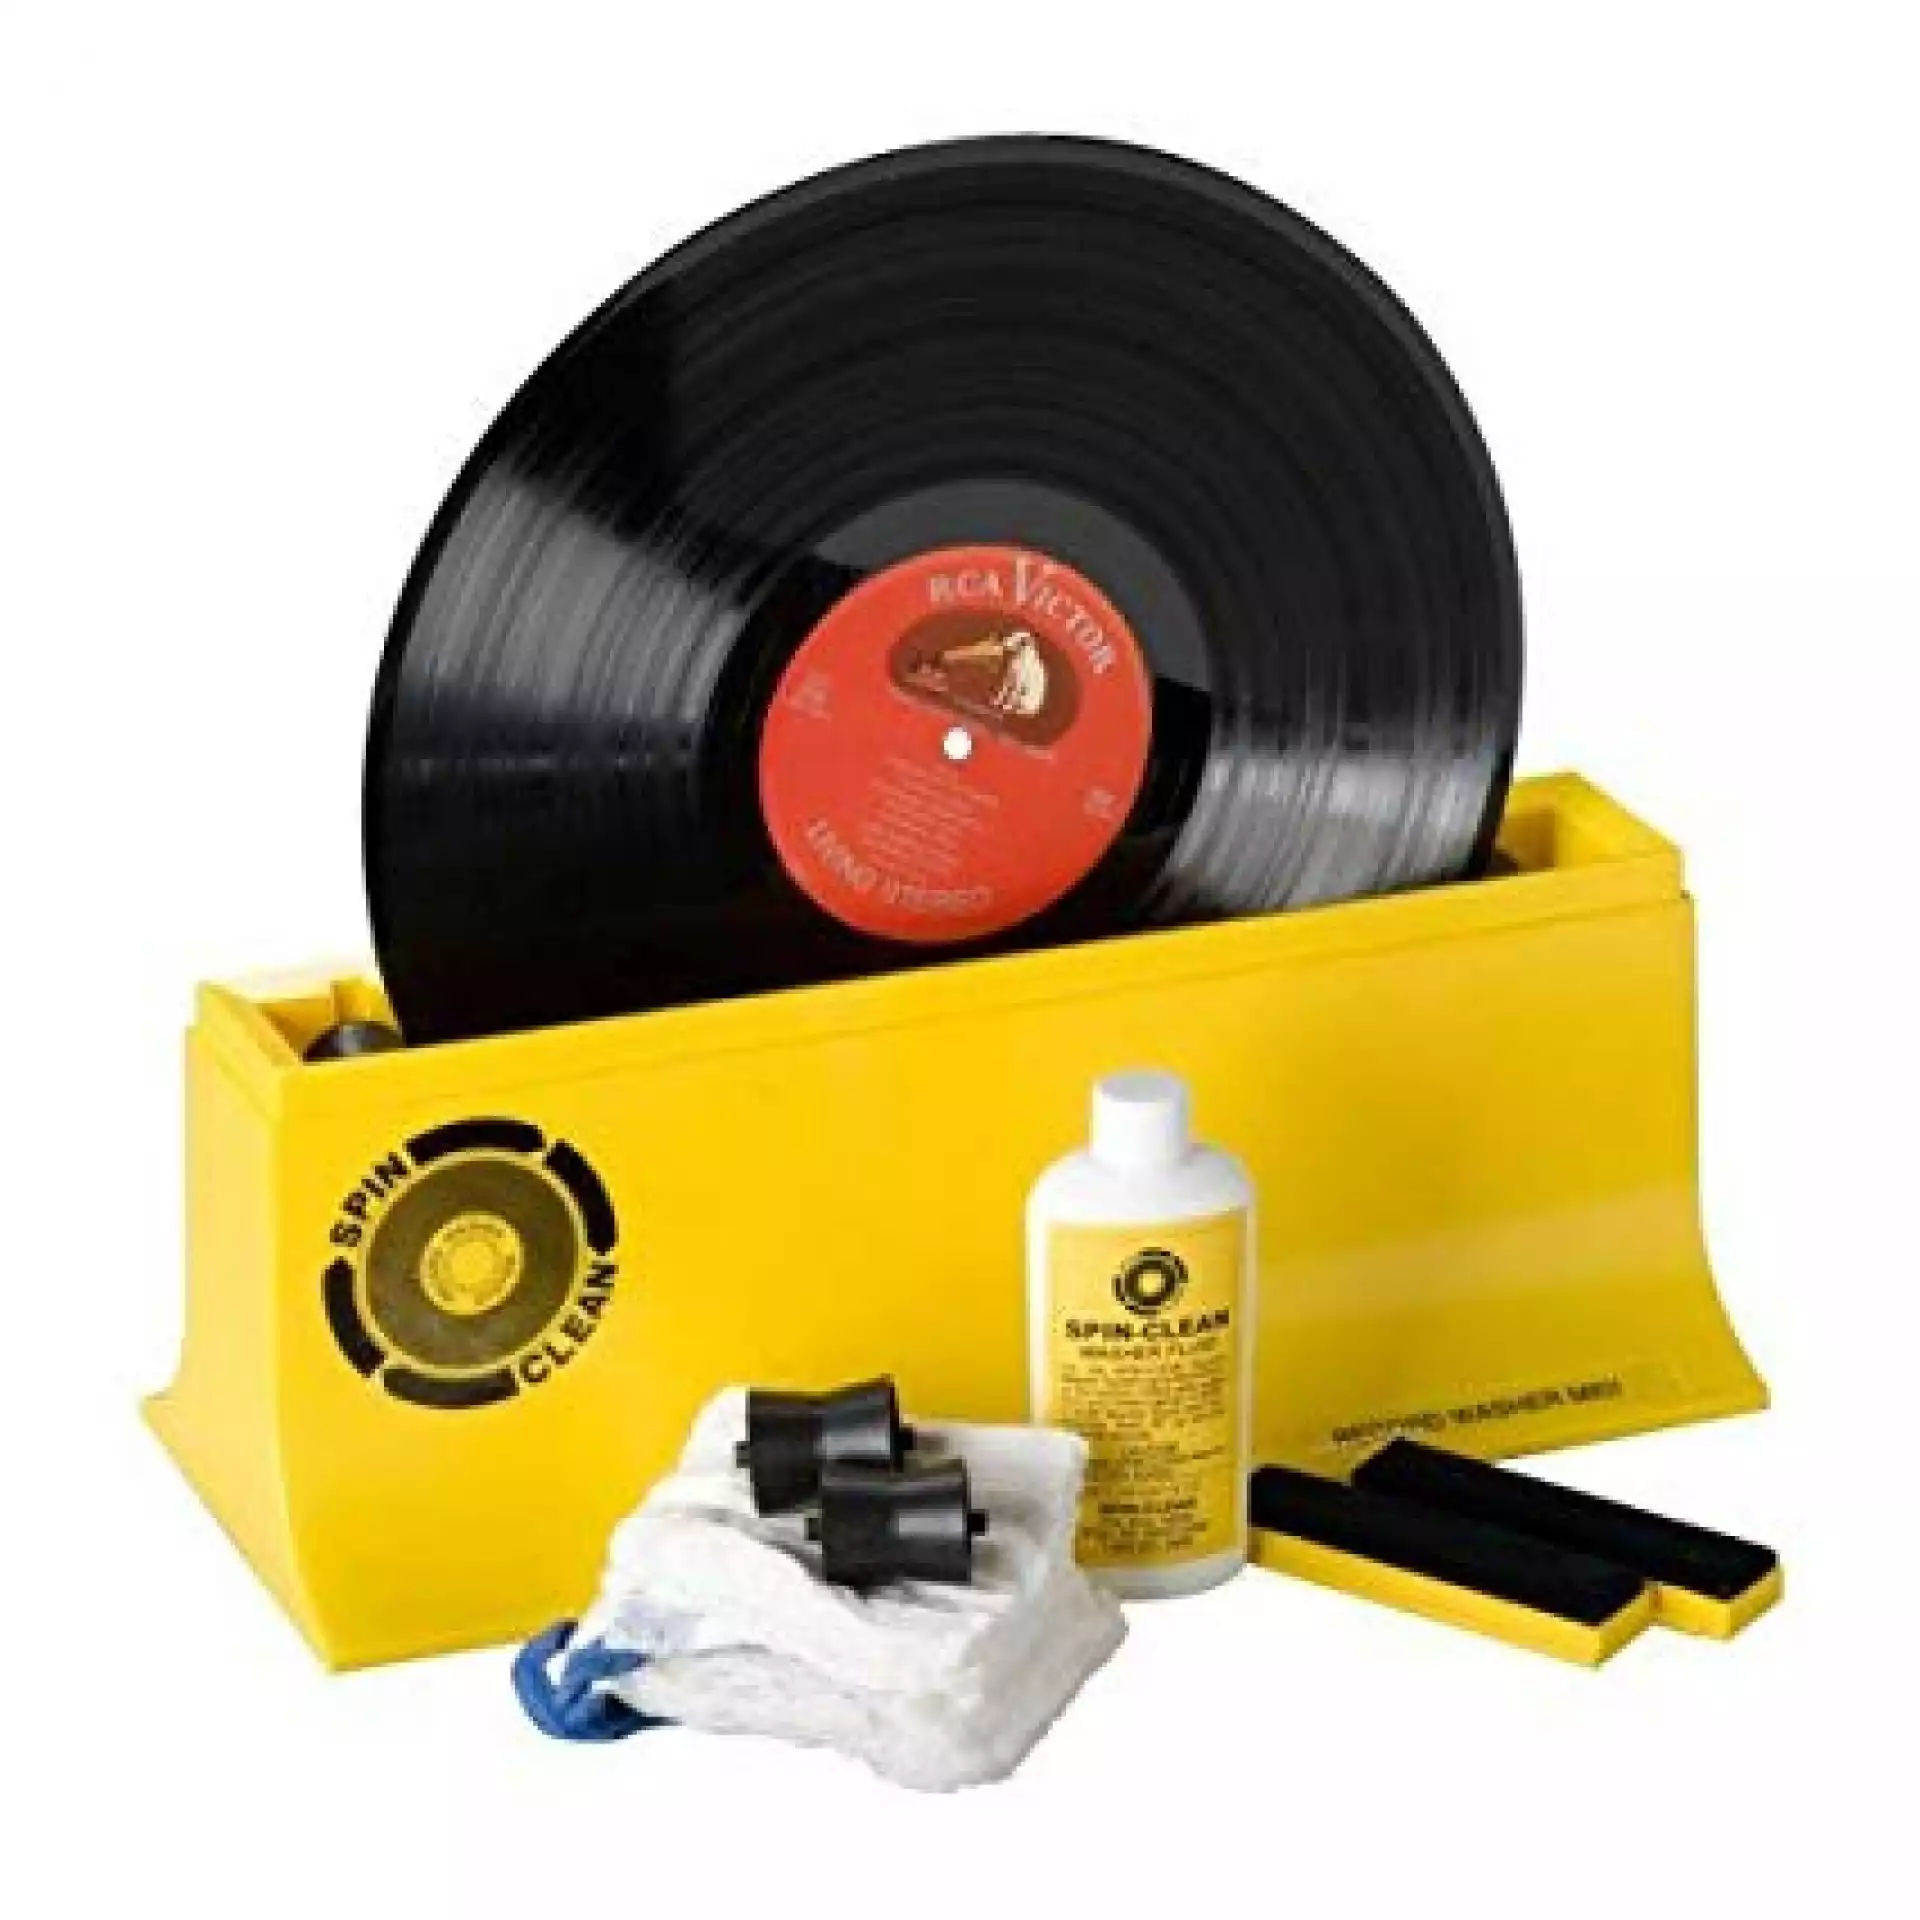 PRO-JECT Spin Clean Record Washer MKII